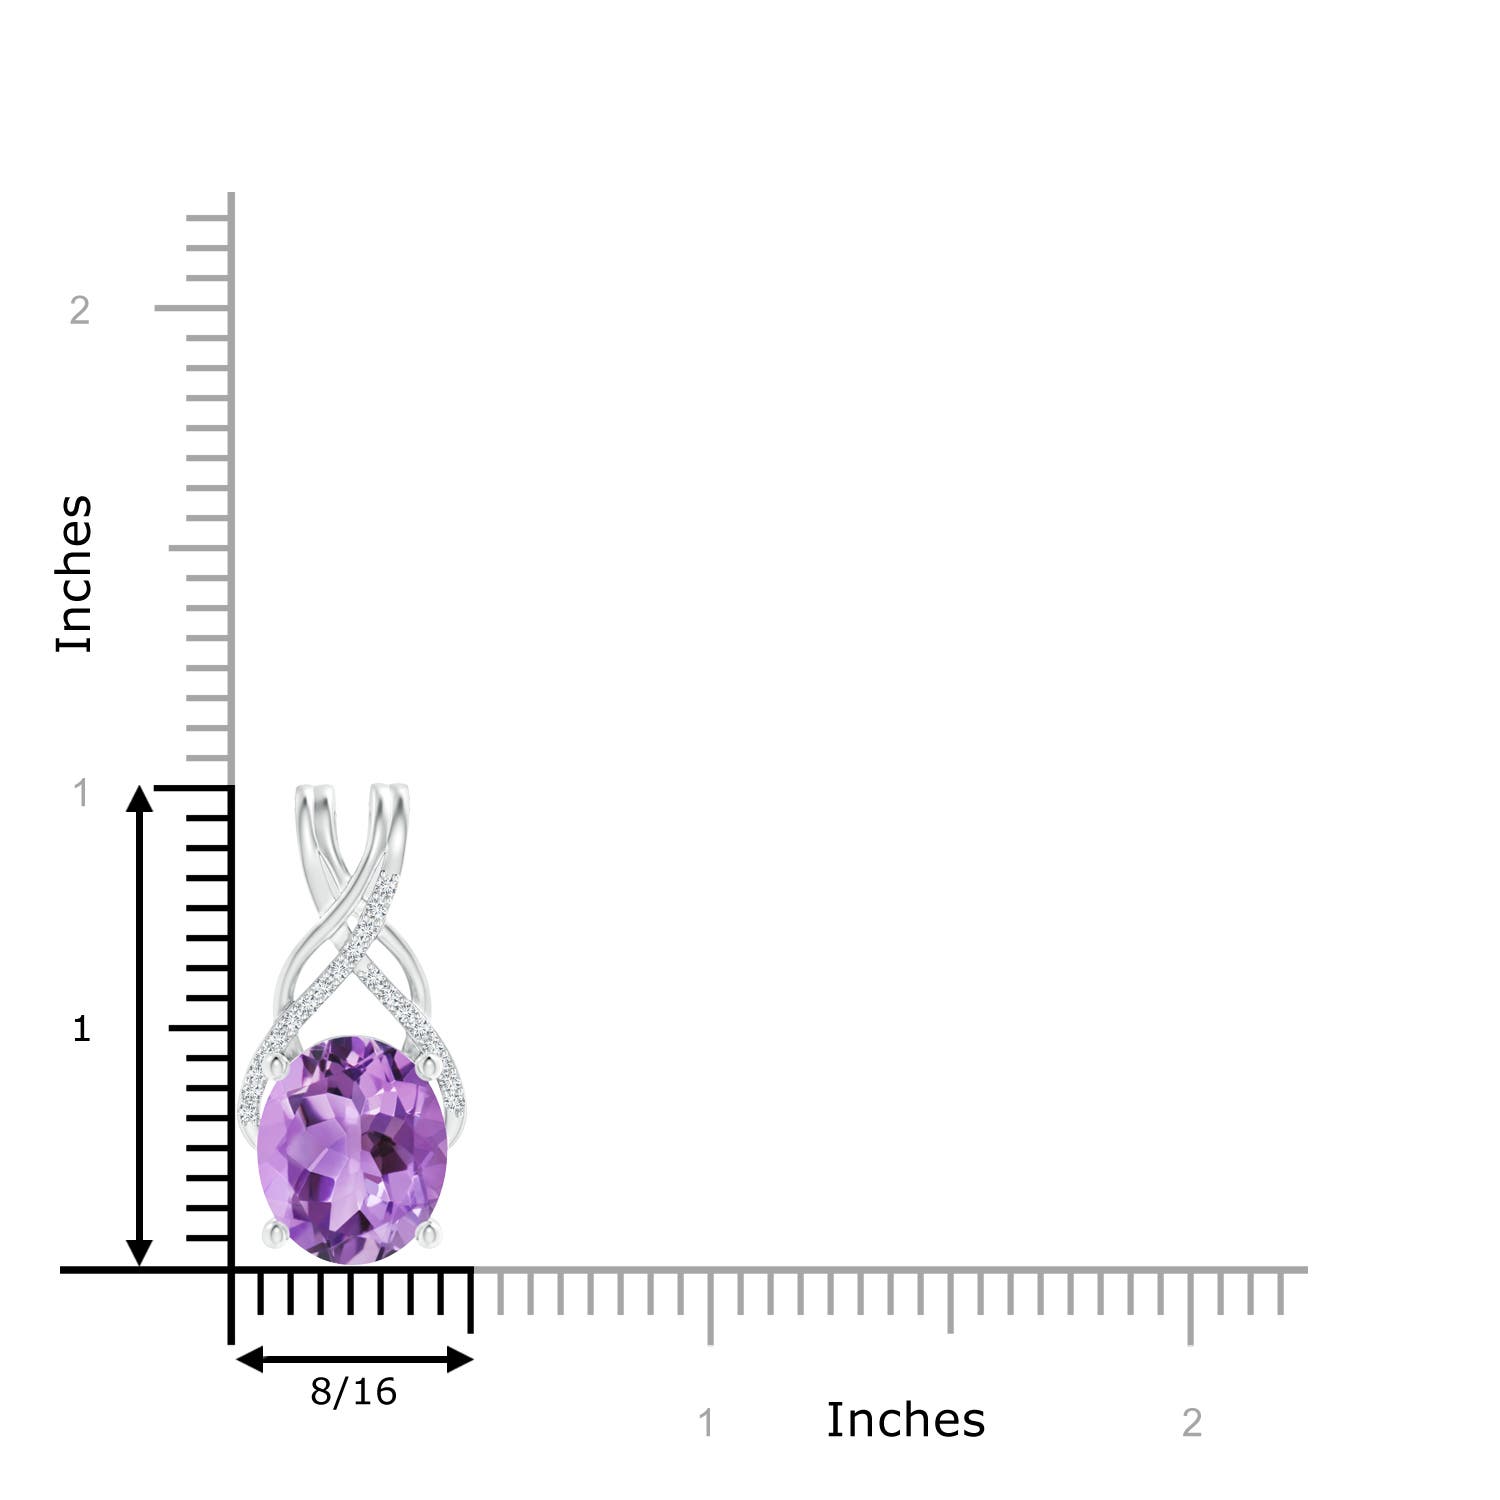 A - Amethyst / 4.43 CT / 14 KT White Gold